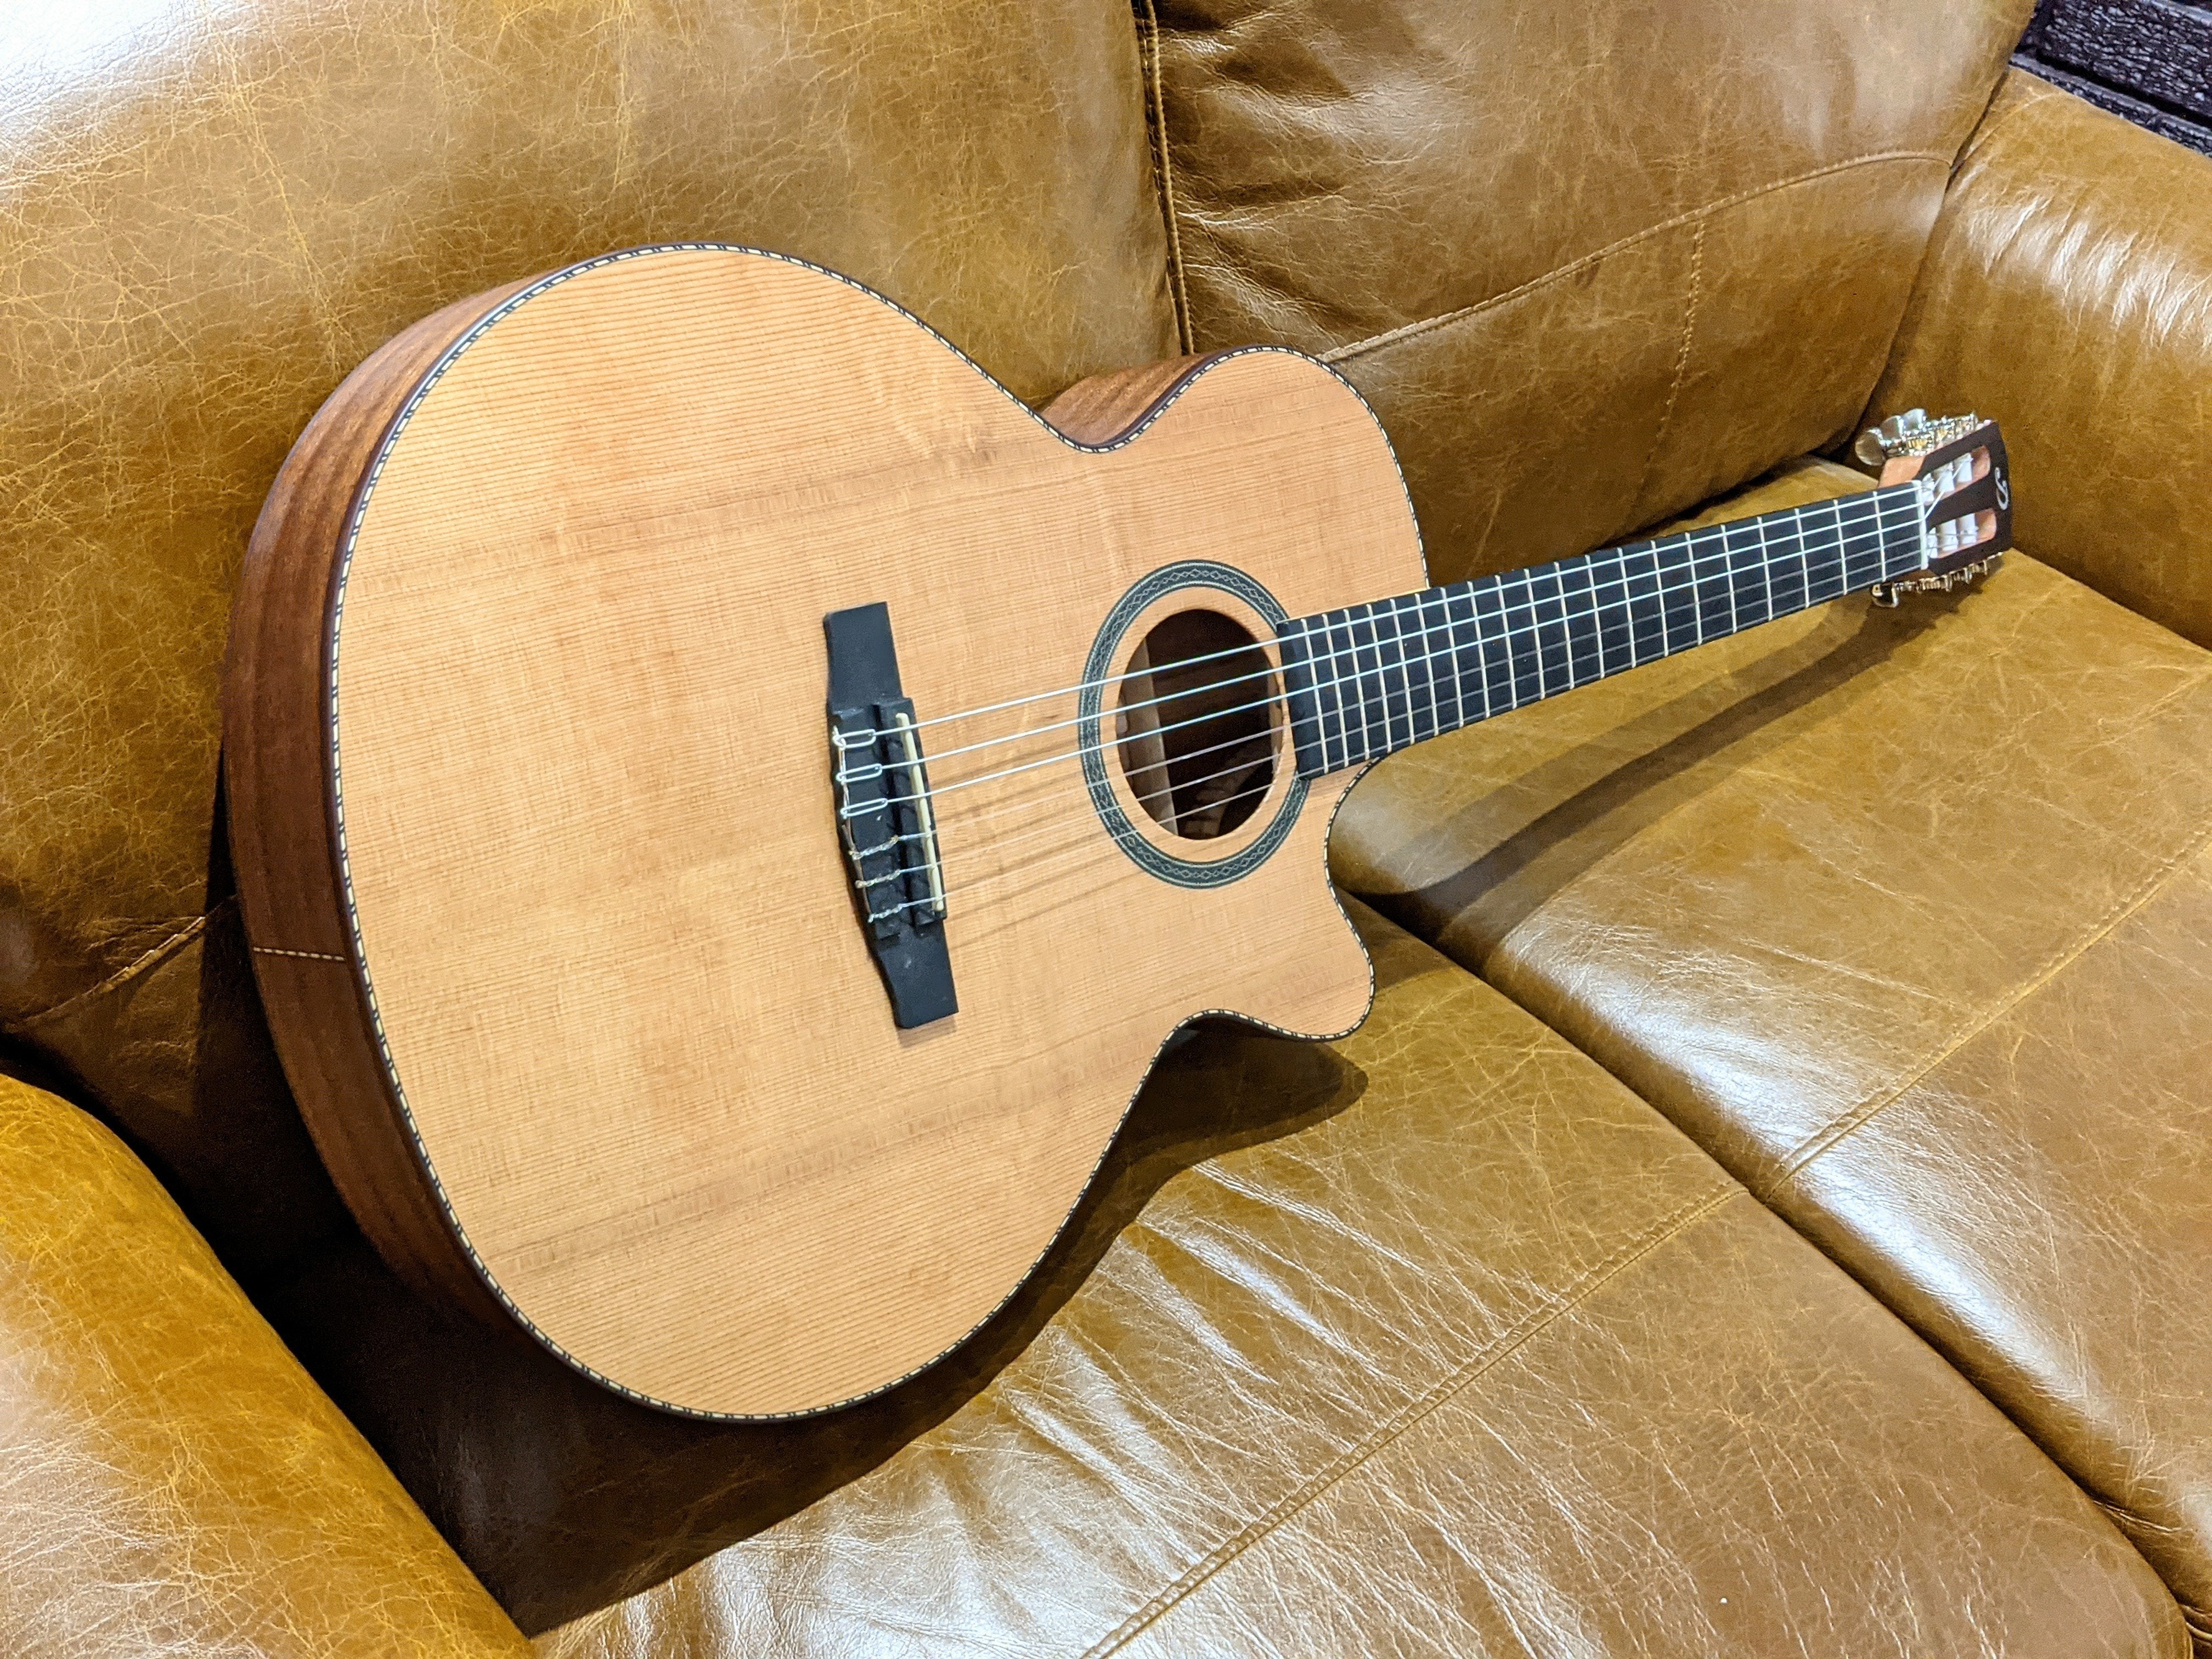 Dowina Rustica CLEC, Acoustic Guitar for sale at Richards Guitars.